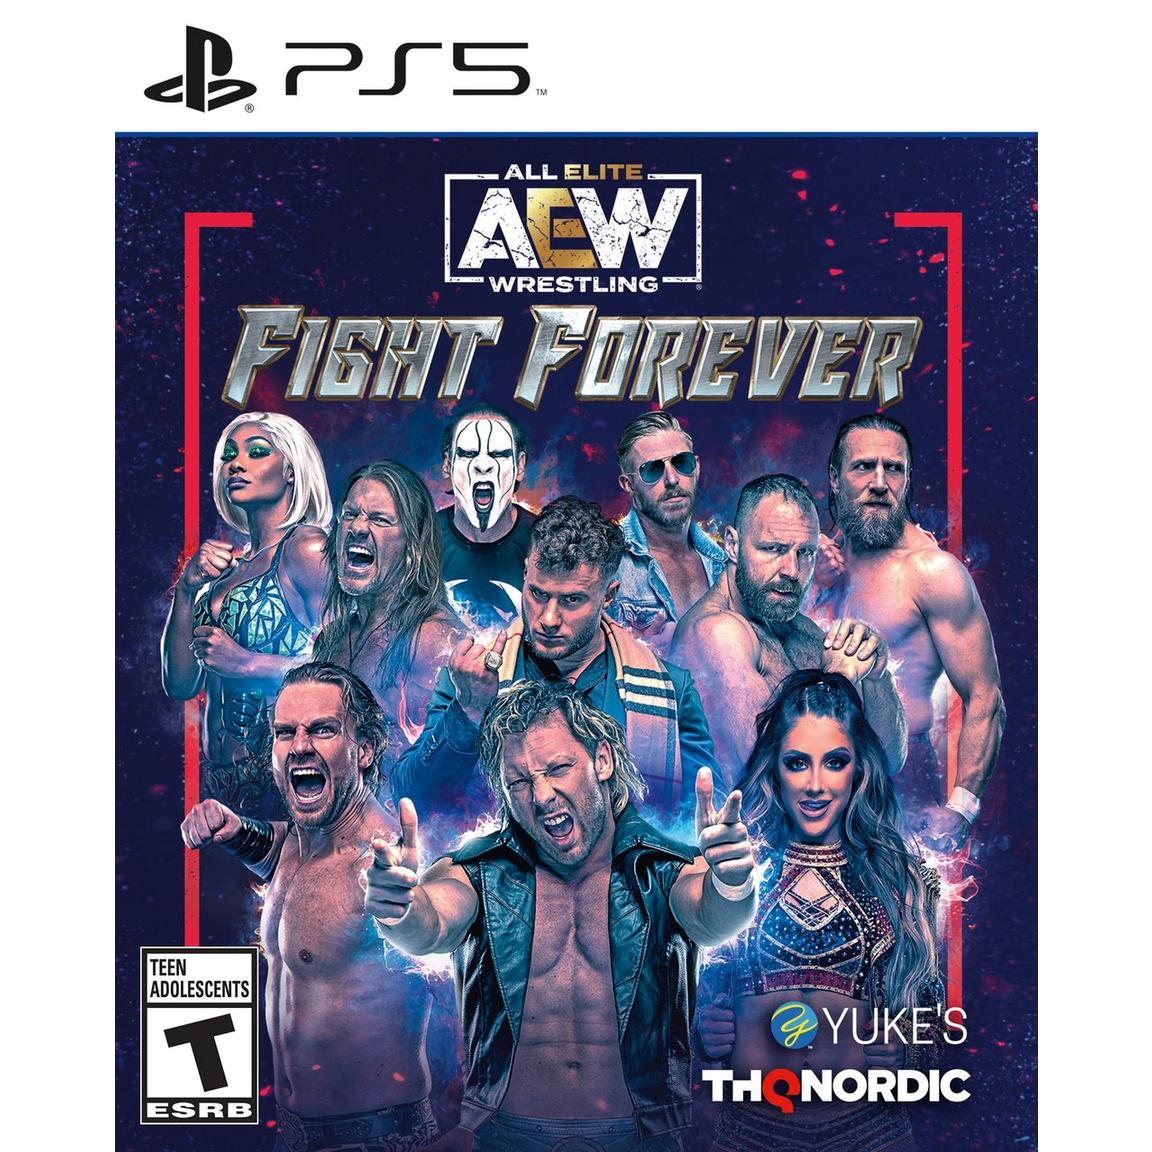 AEW:Fight Forever